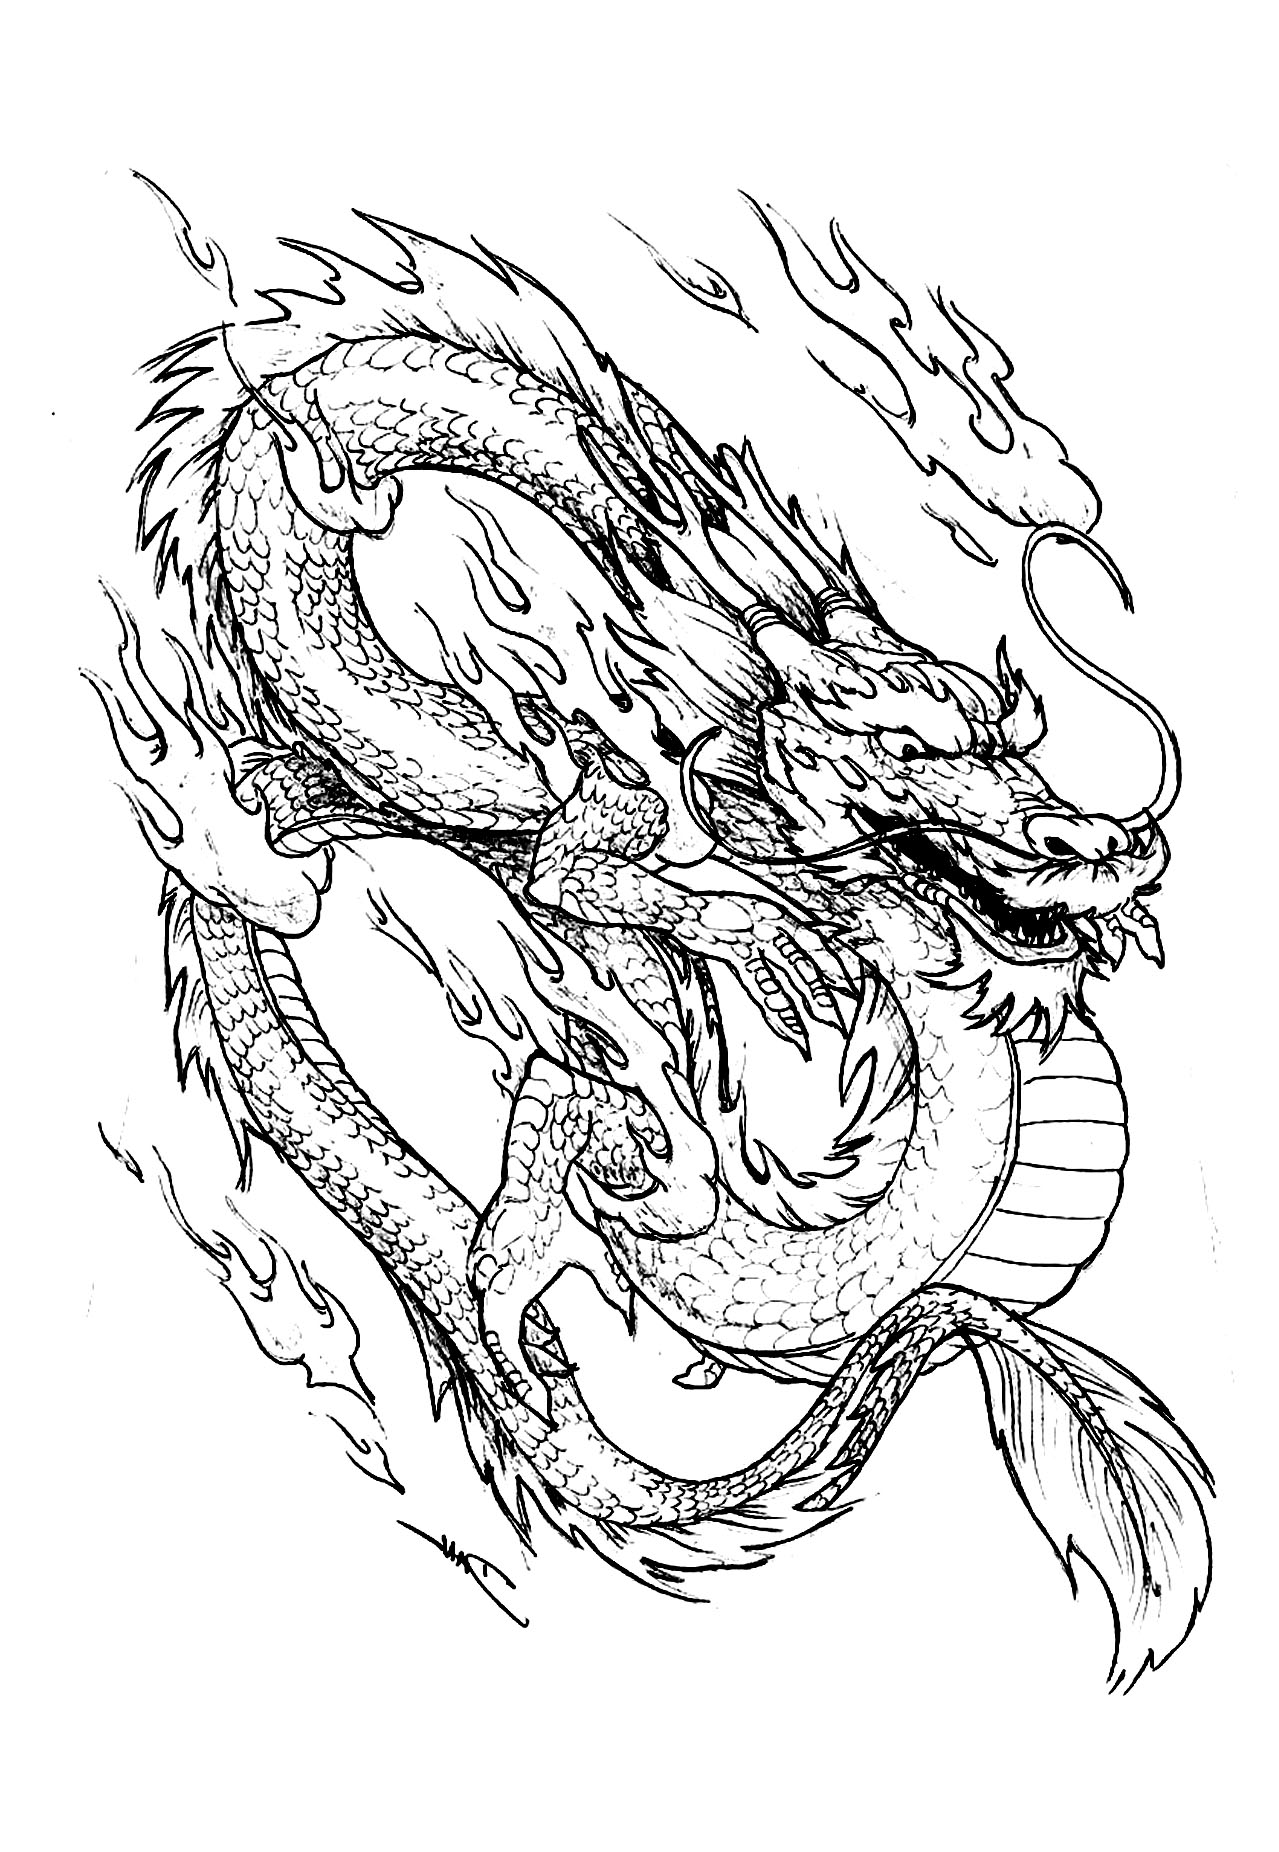 Drawing of a Chinese dragon, teeming with detail and extremely harmonious.